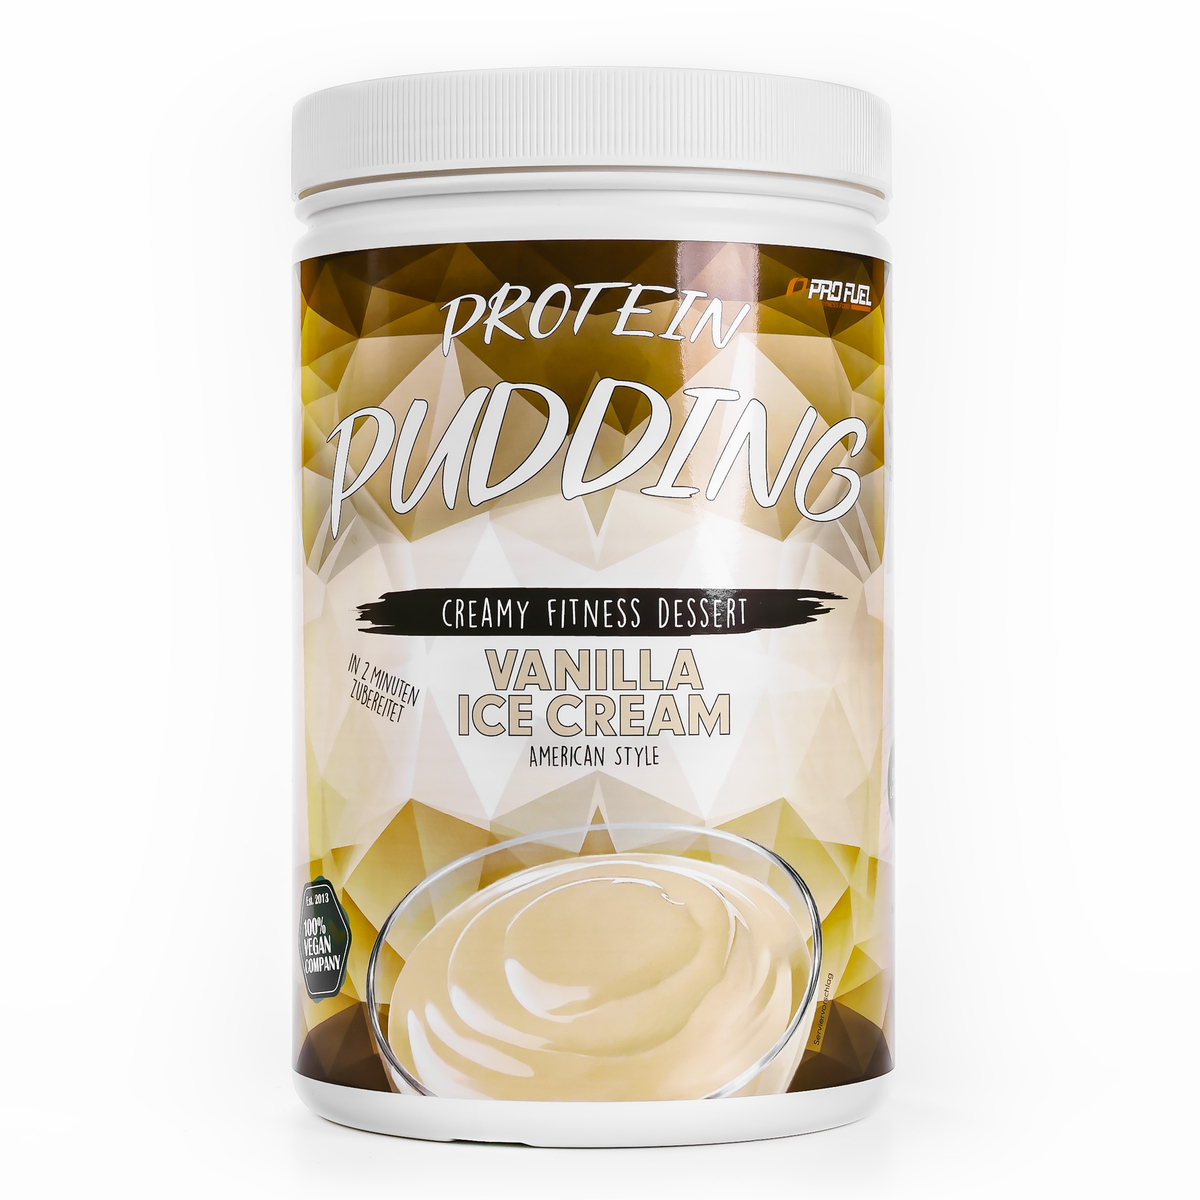 PRO FUEL PROTEIN PUDDING 600g